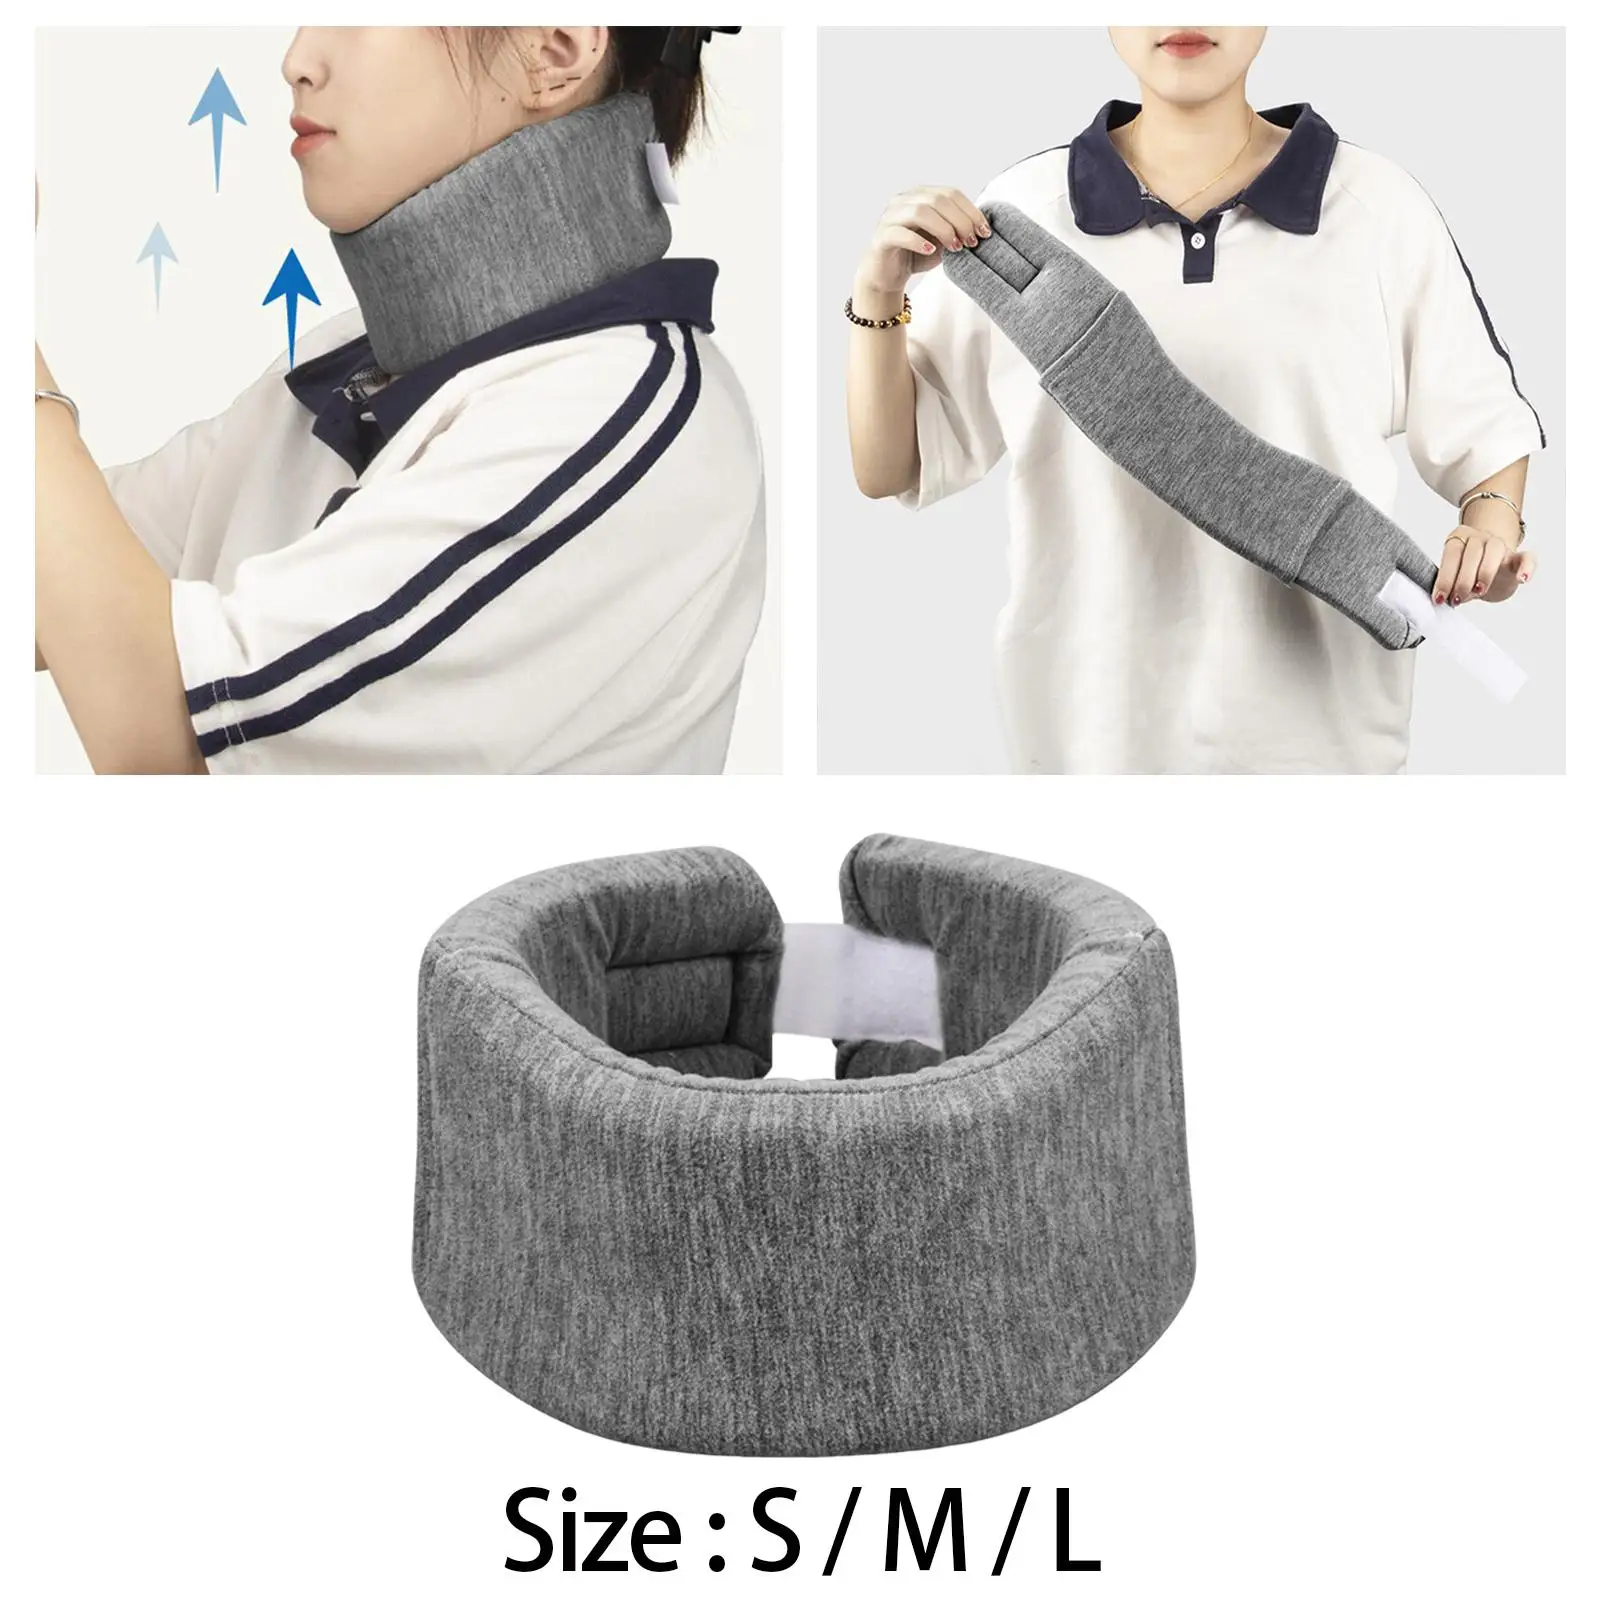 Traveling Pillow Machine Washable Portable Soft Neck Pillow for Traveling on Airplane Support Pillow for Car Plane Home Rest Use